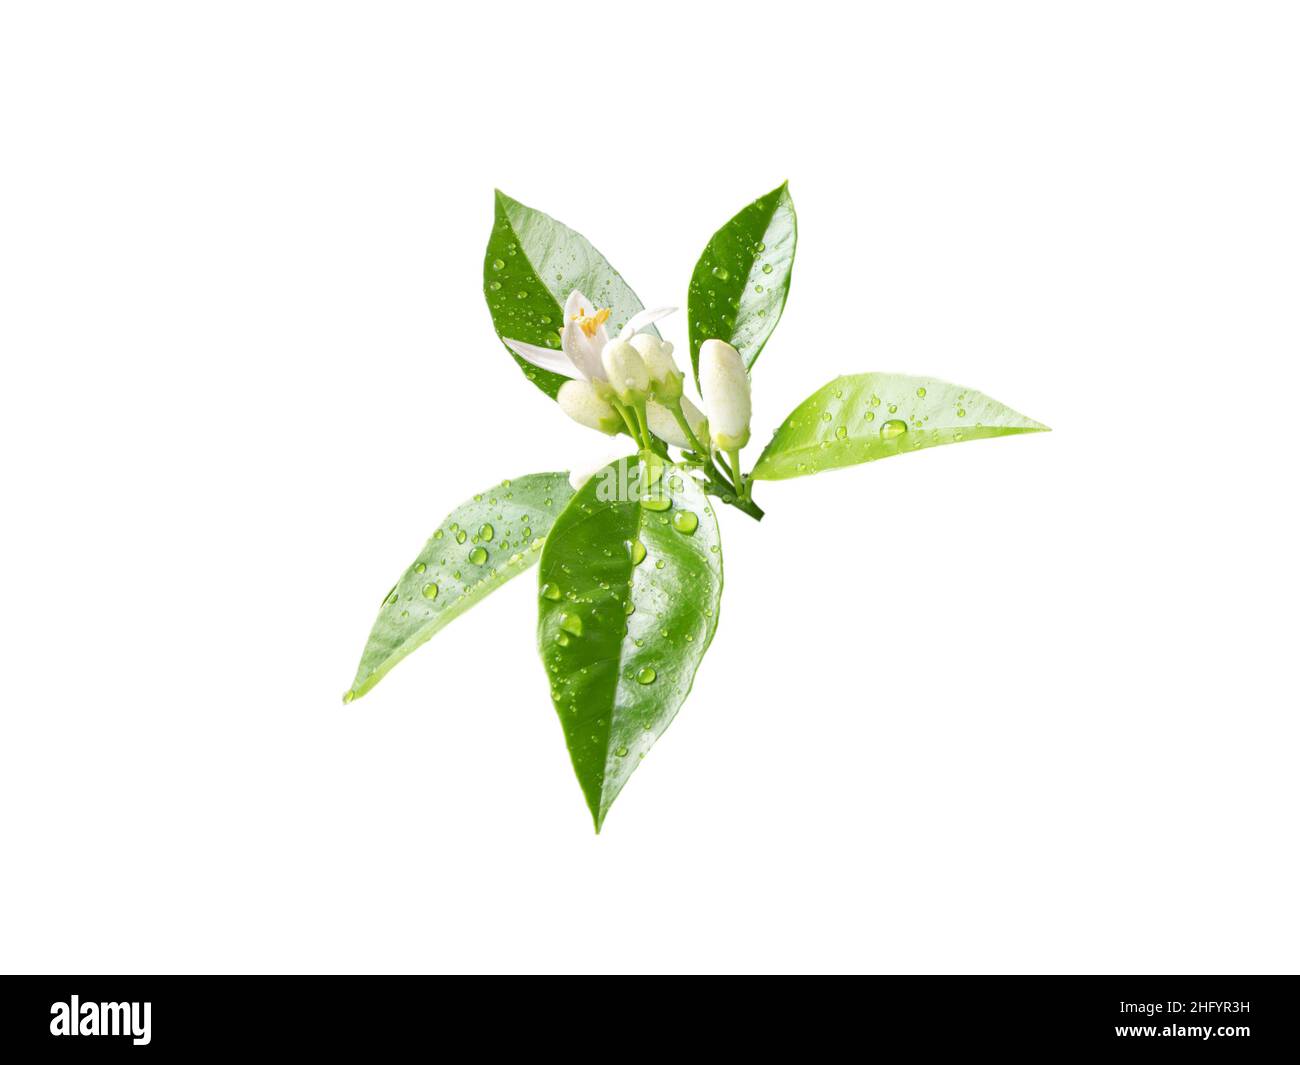 Orange tree branch with white flowers, buds and leaves and rain drops isolated on white. Neroli blossom. Stock Photo